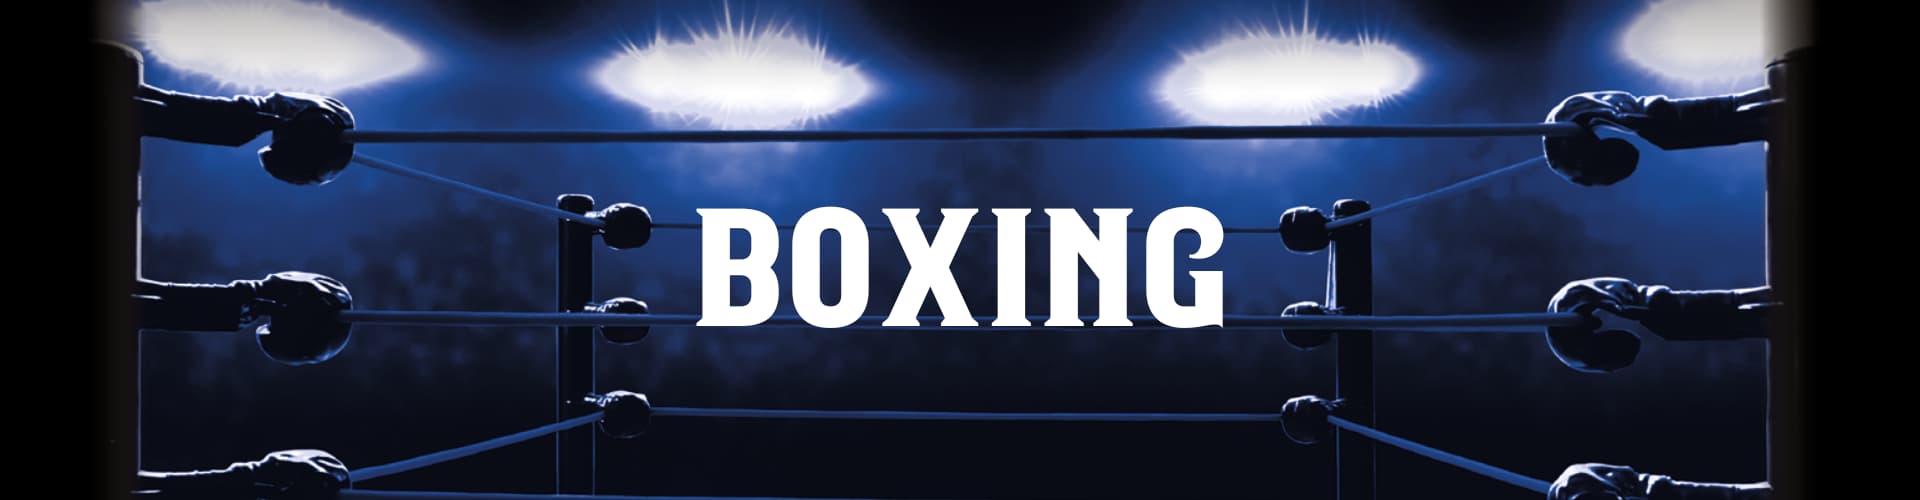 Watch Live Boxing in Dunfermline at East Port Pub